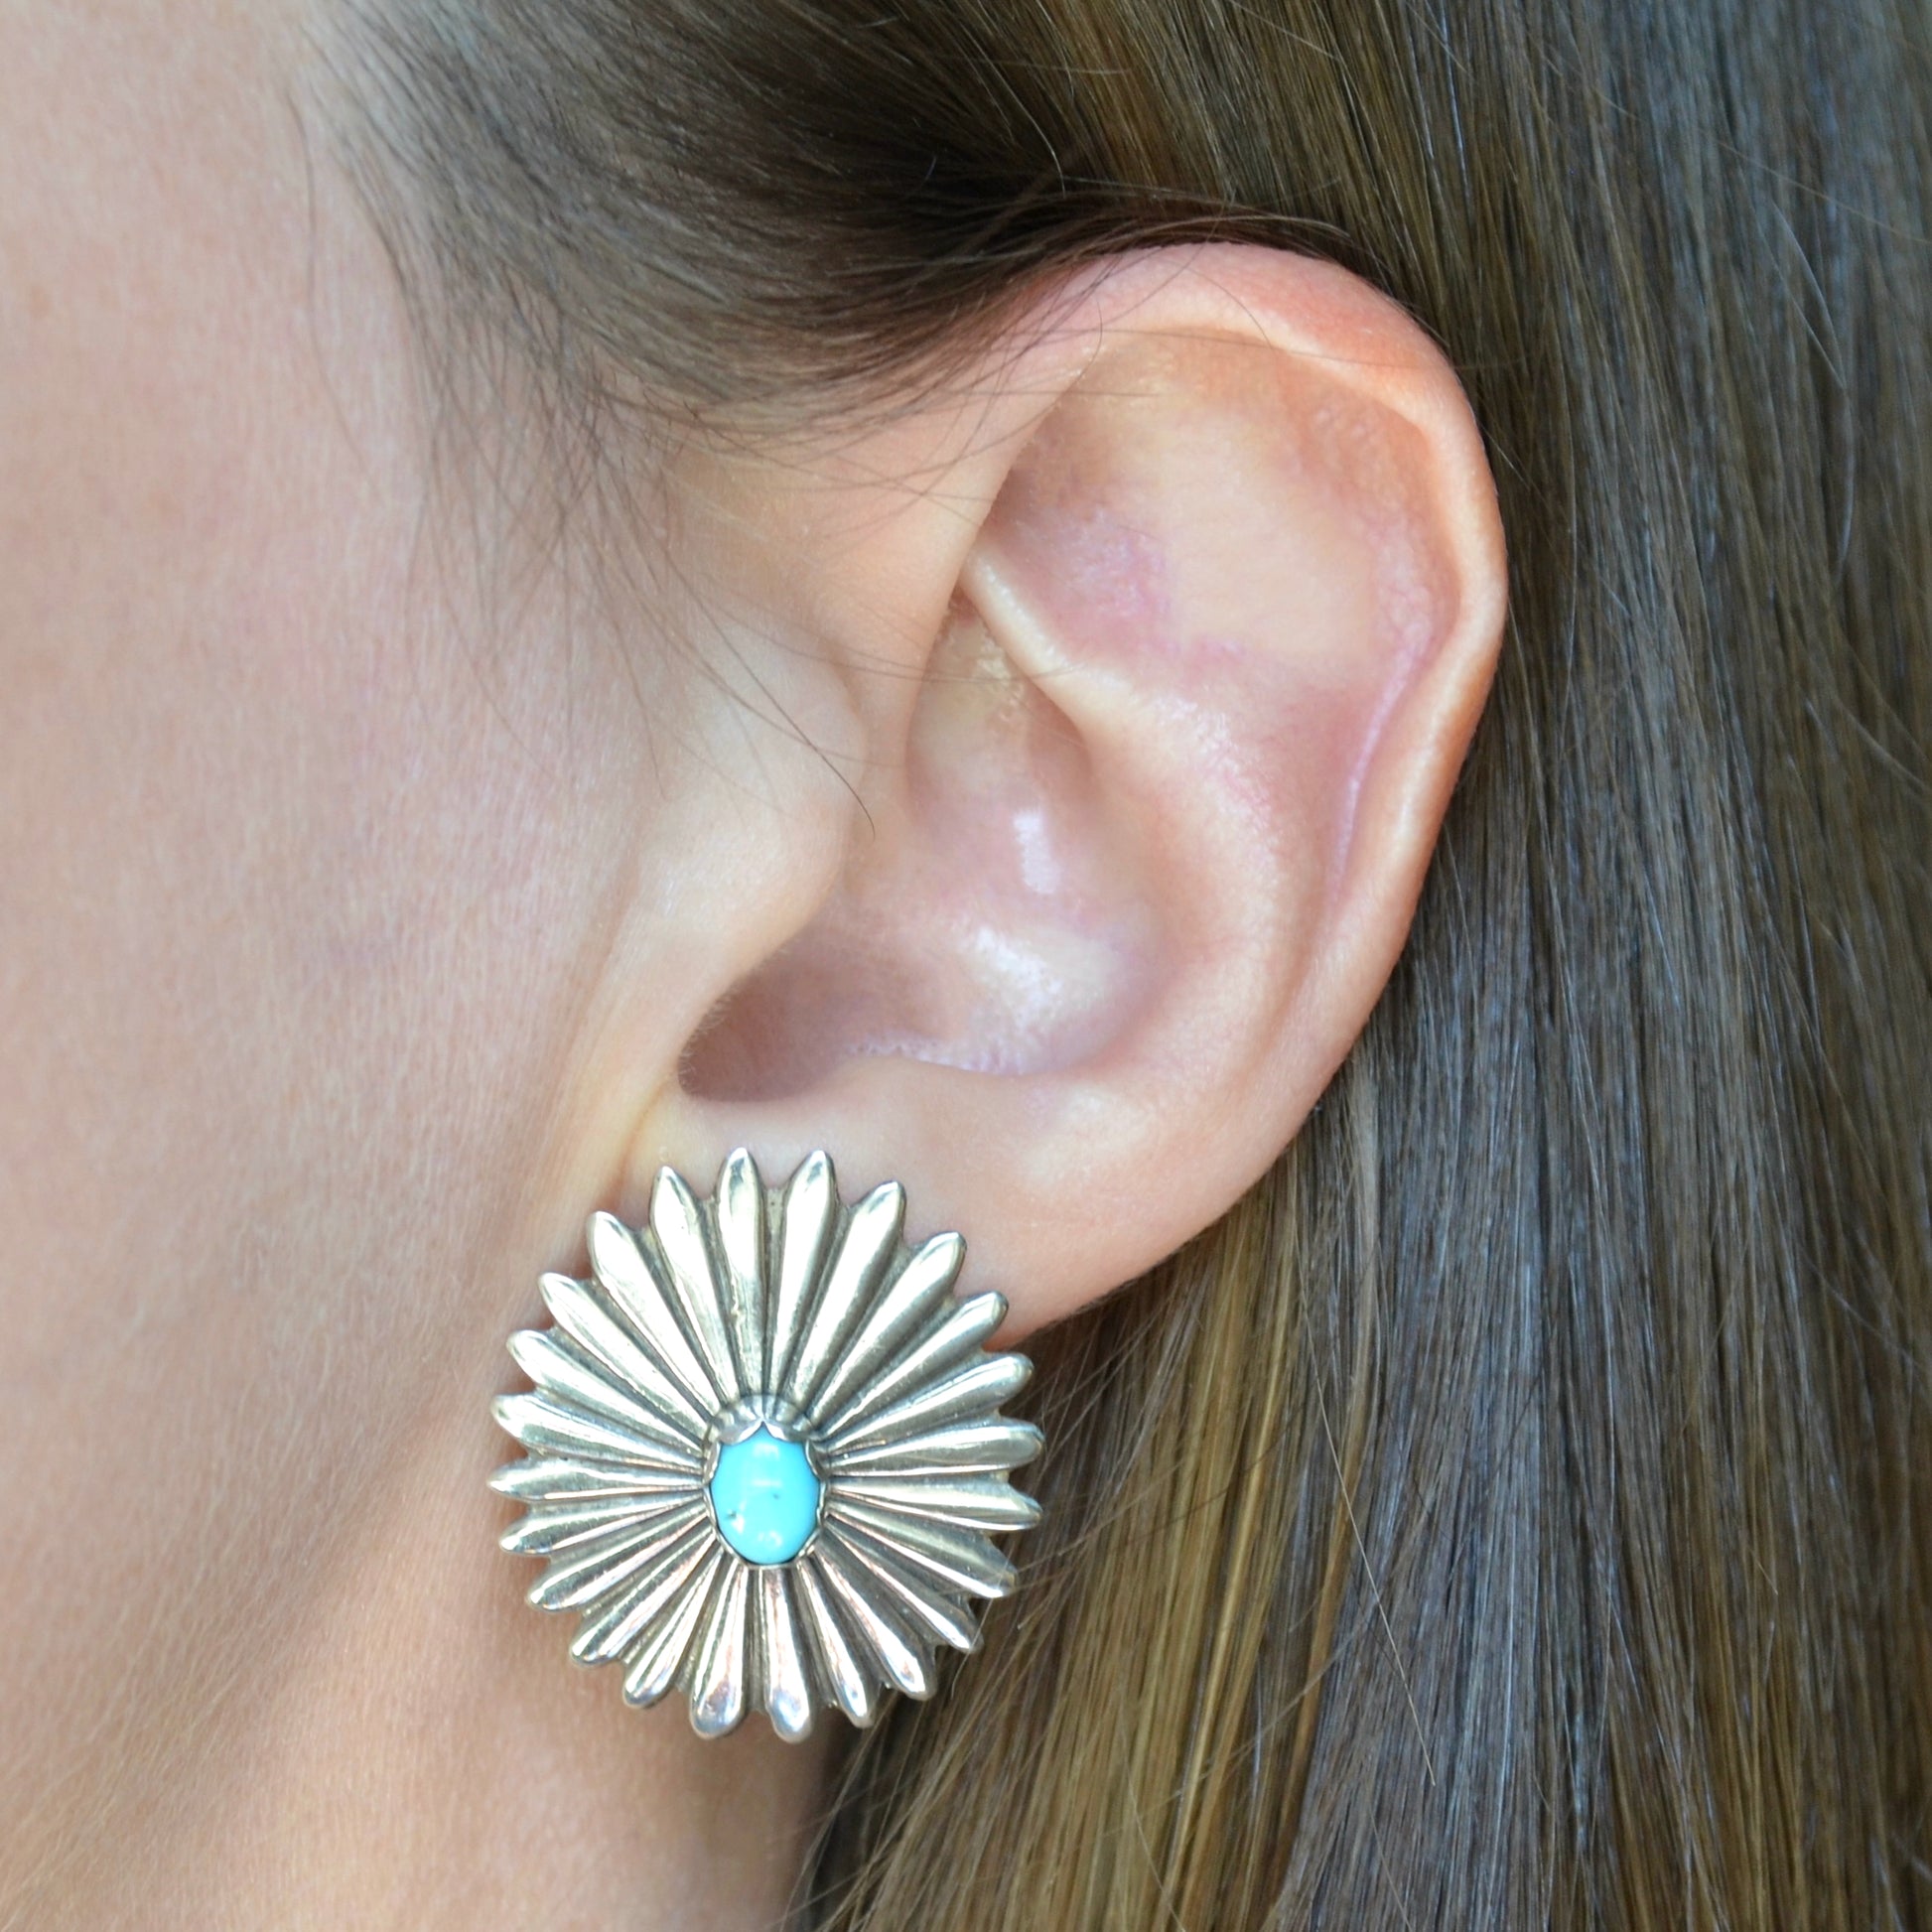 Vintage Turquoise and Sterling Silver Navajo Sunburst Earrings